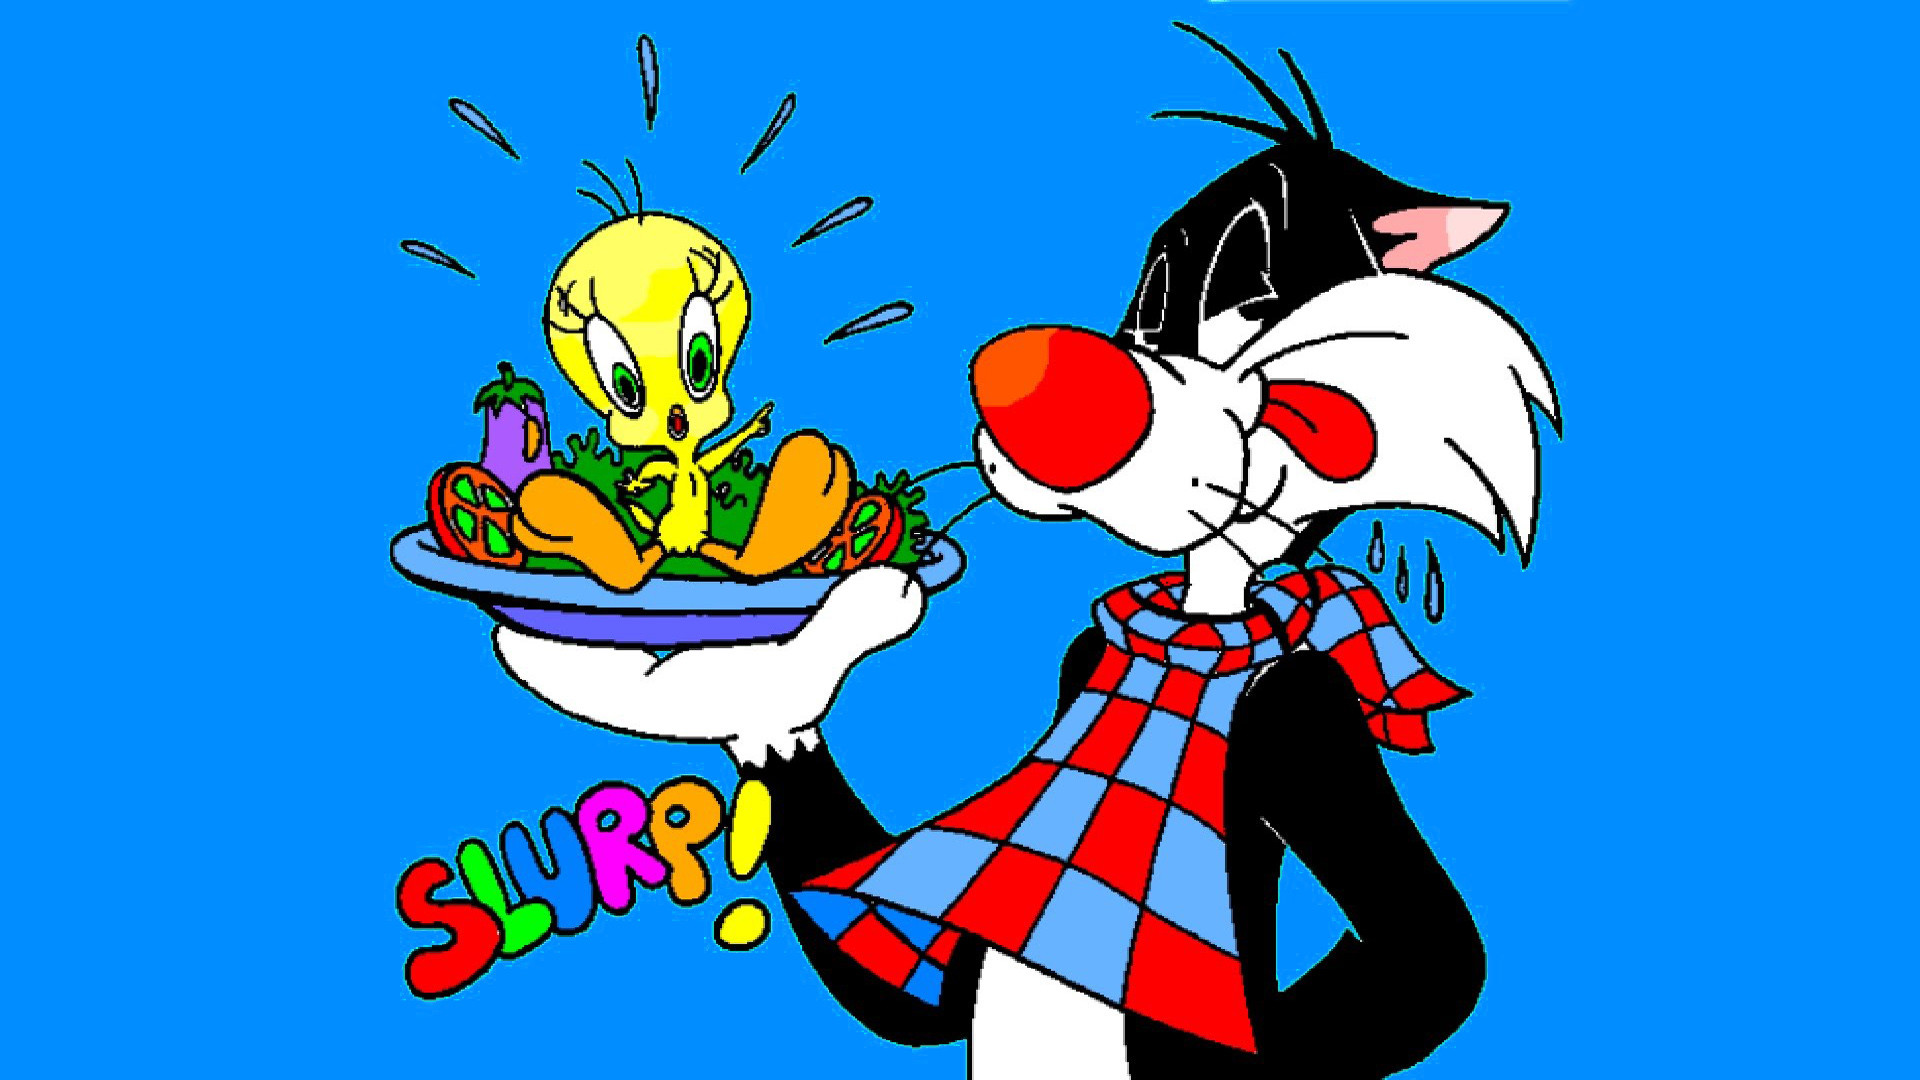 Sylvester The Cat Wallpaper (58+ images)